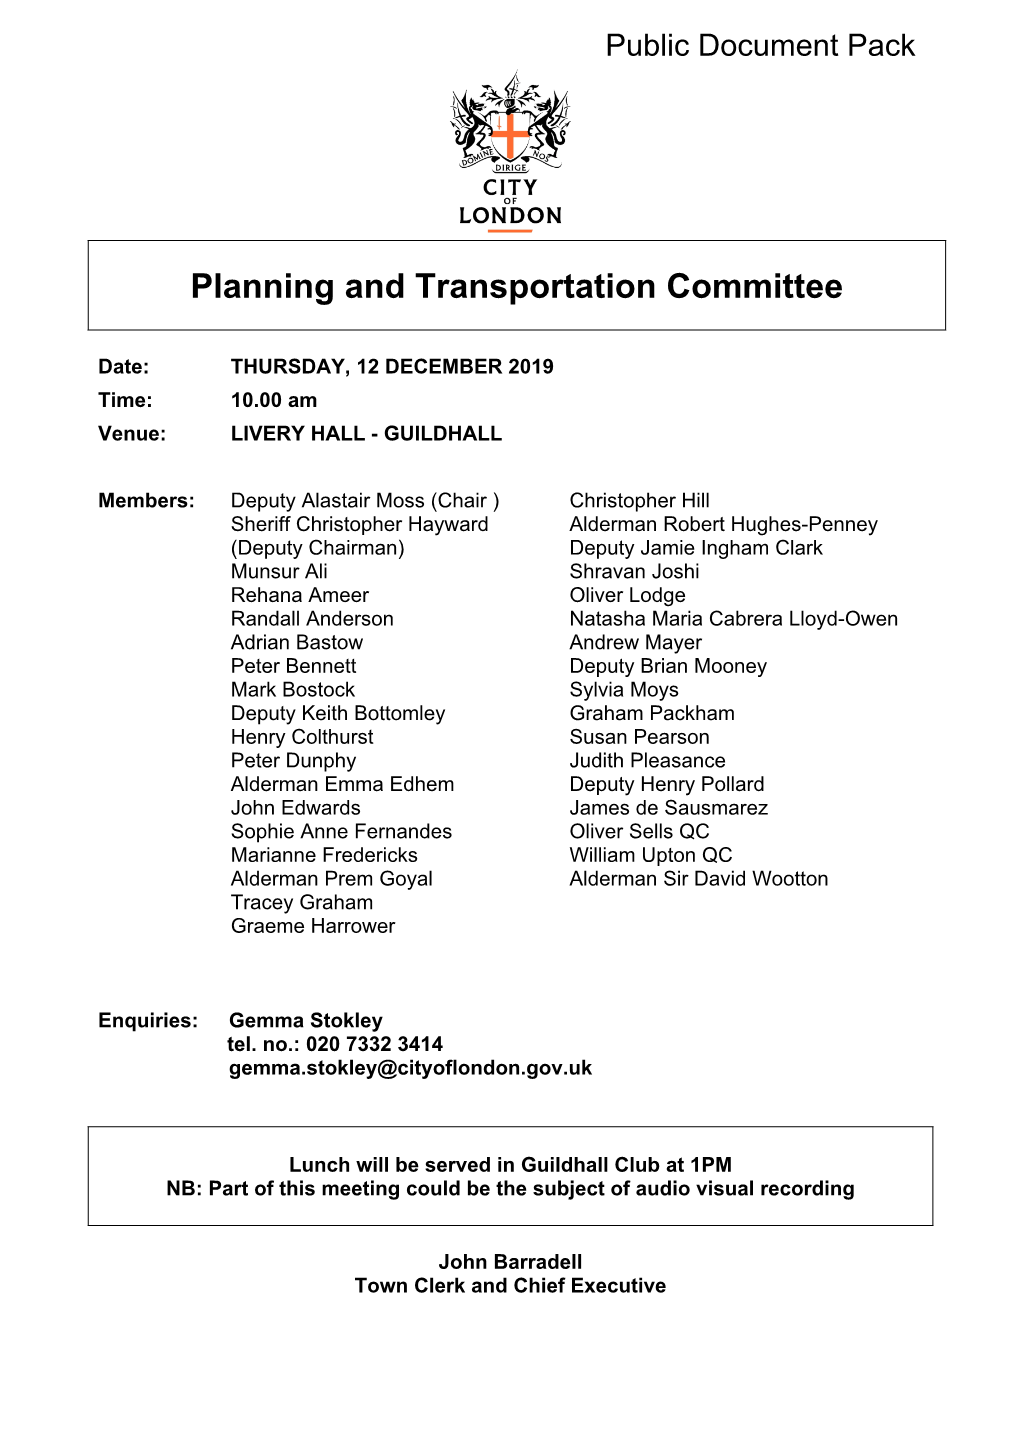 (Public Pack)Agenda Document for Planning and Transportation